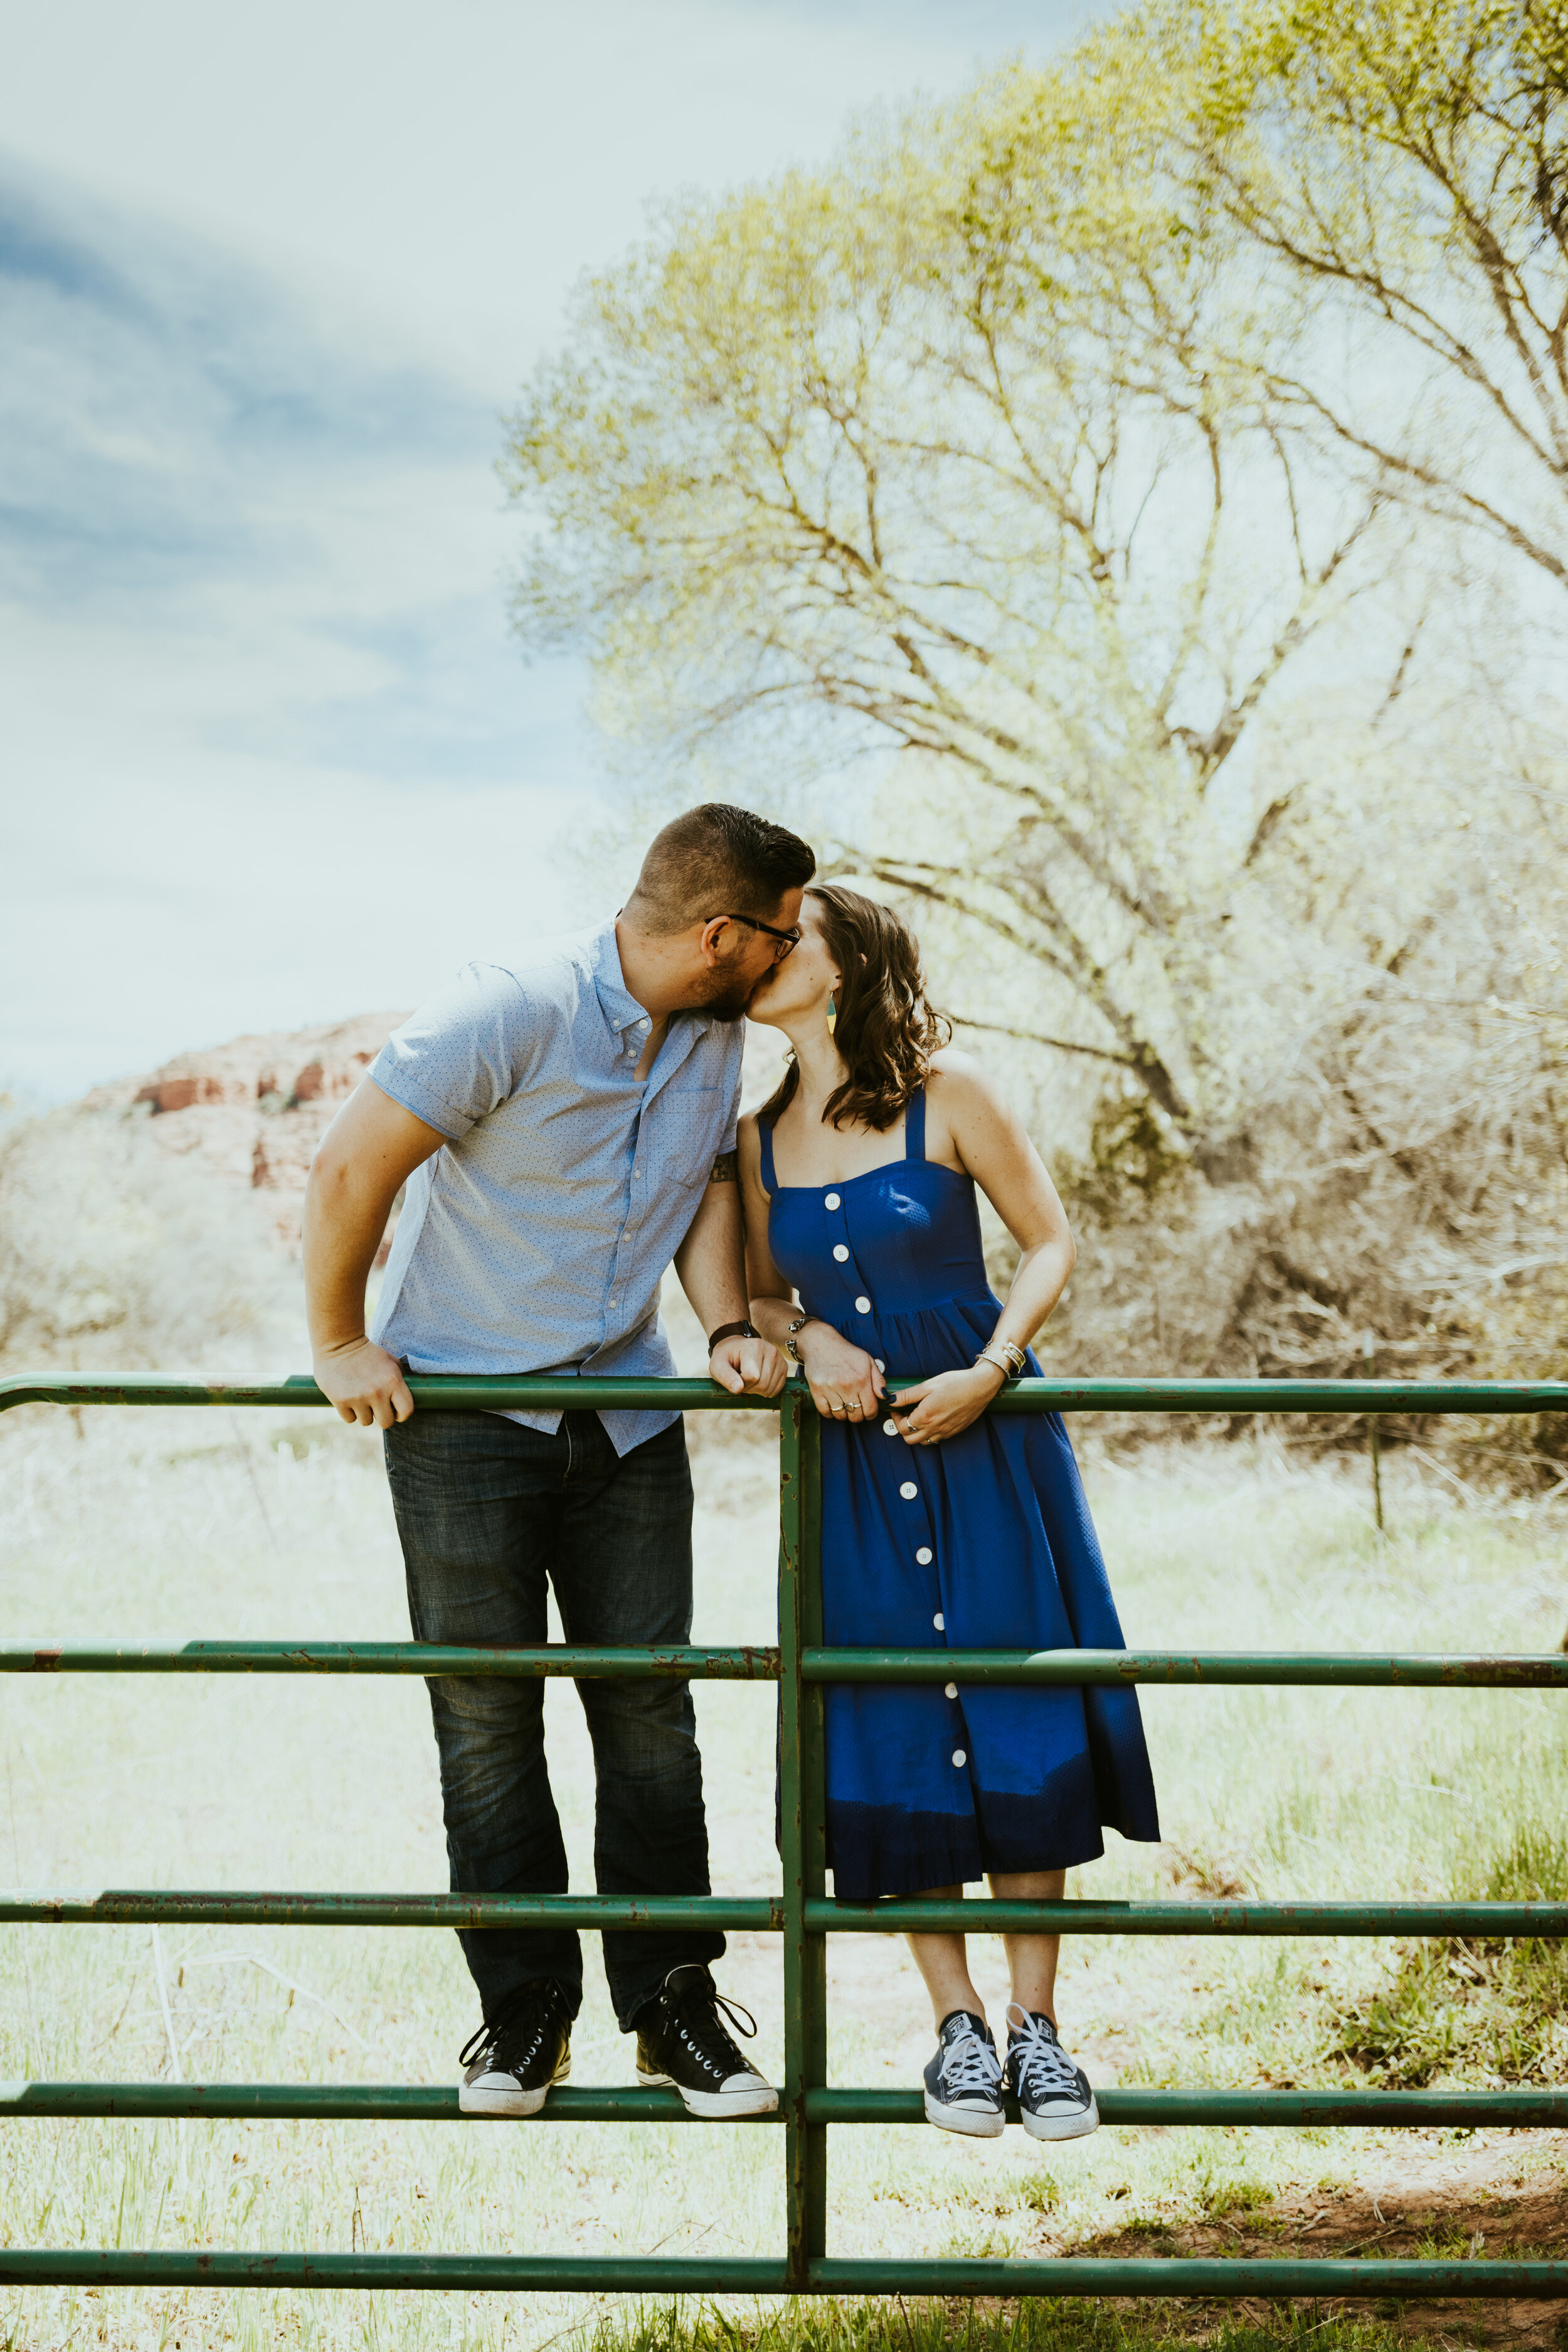 red rock crossing sedona arizona cathedral rock crescent moon ranch couple photos engagement photo outfit inspiration couple posing ideas midday photos-35.jpg